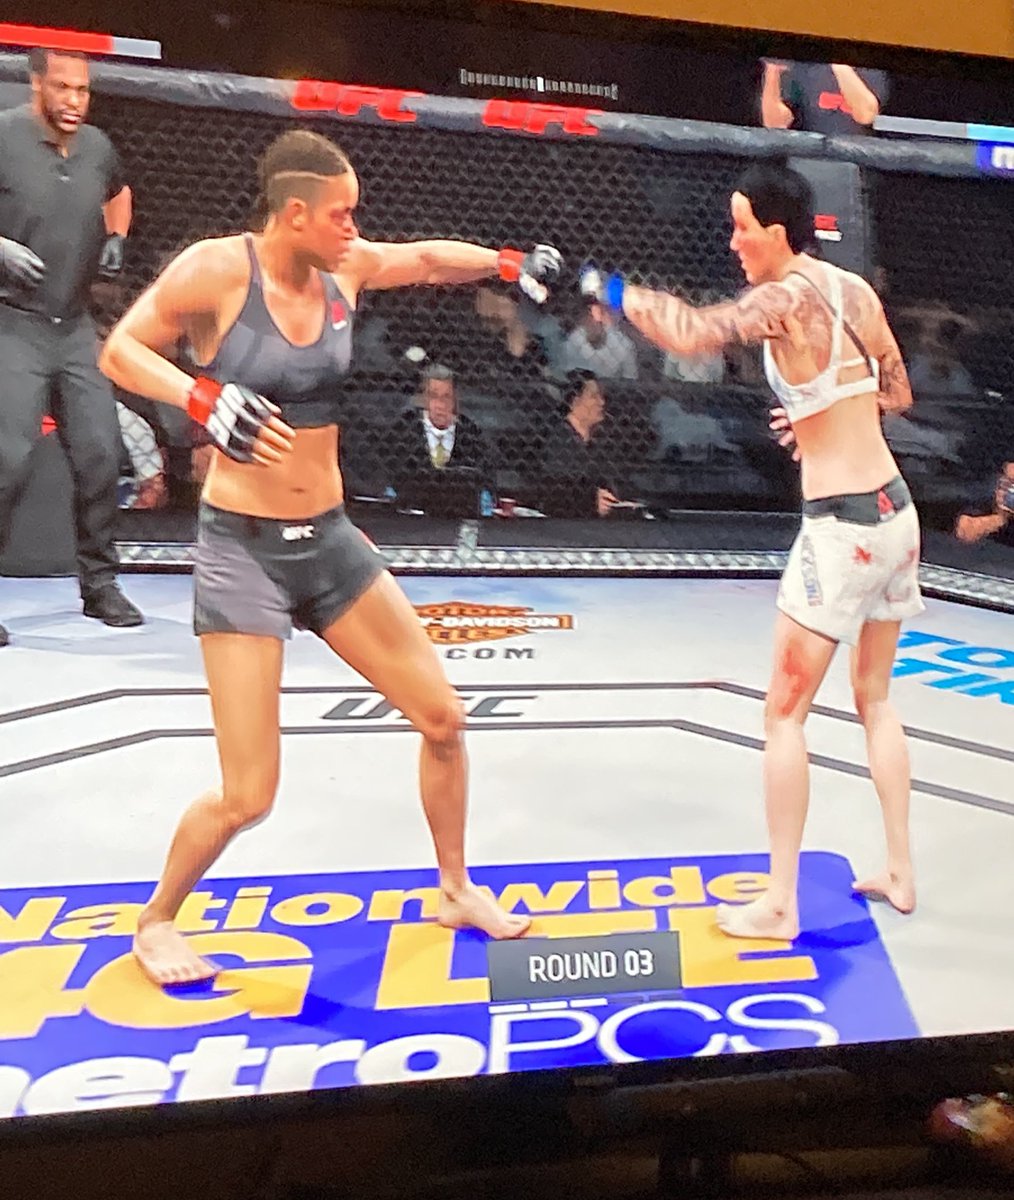 Playing some #UFC 2! Going into the third round against Amanda Nunes for the Women’s Bantamweight title! #PlayStation #Gaming #Fighting https://t.co/CwAIn75g71